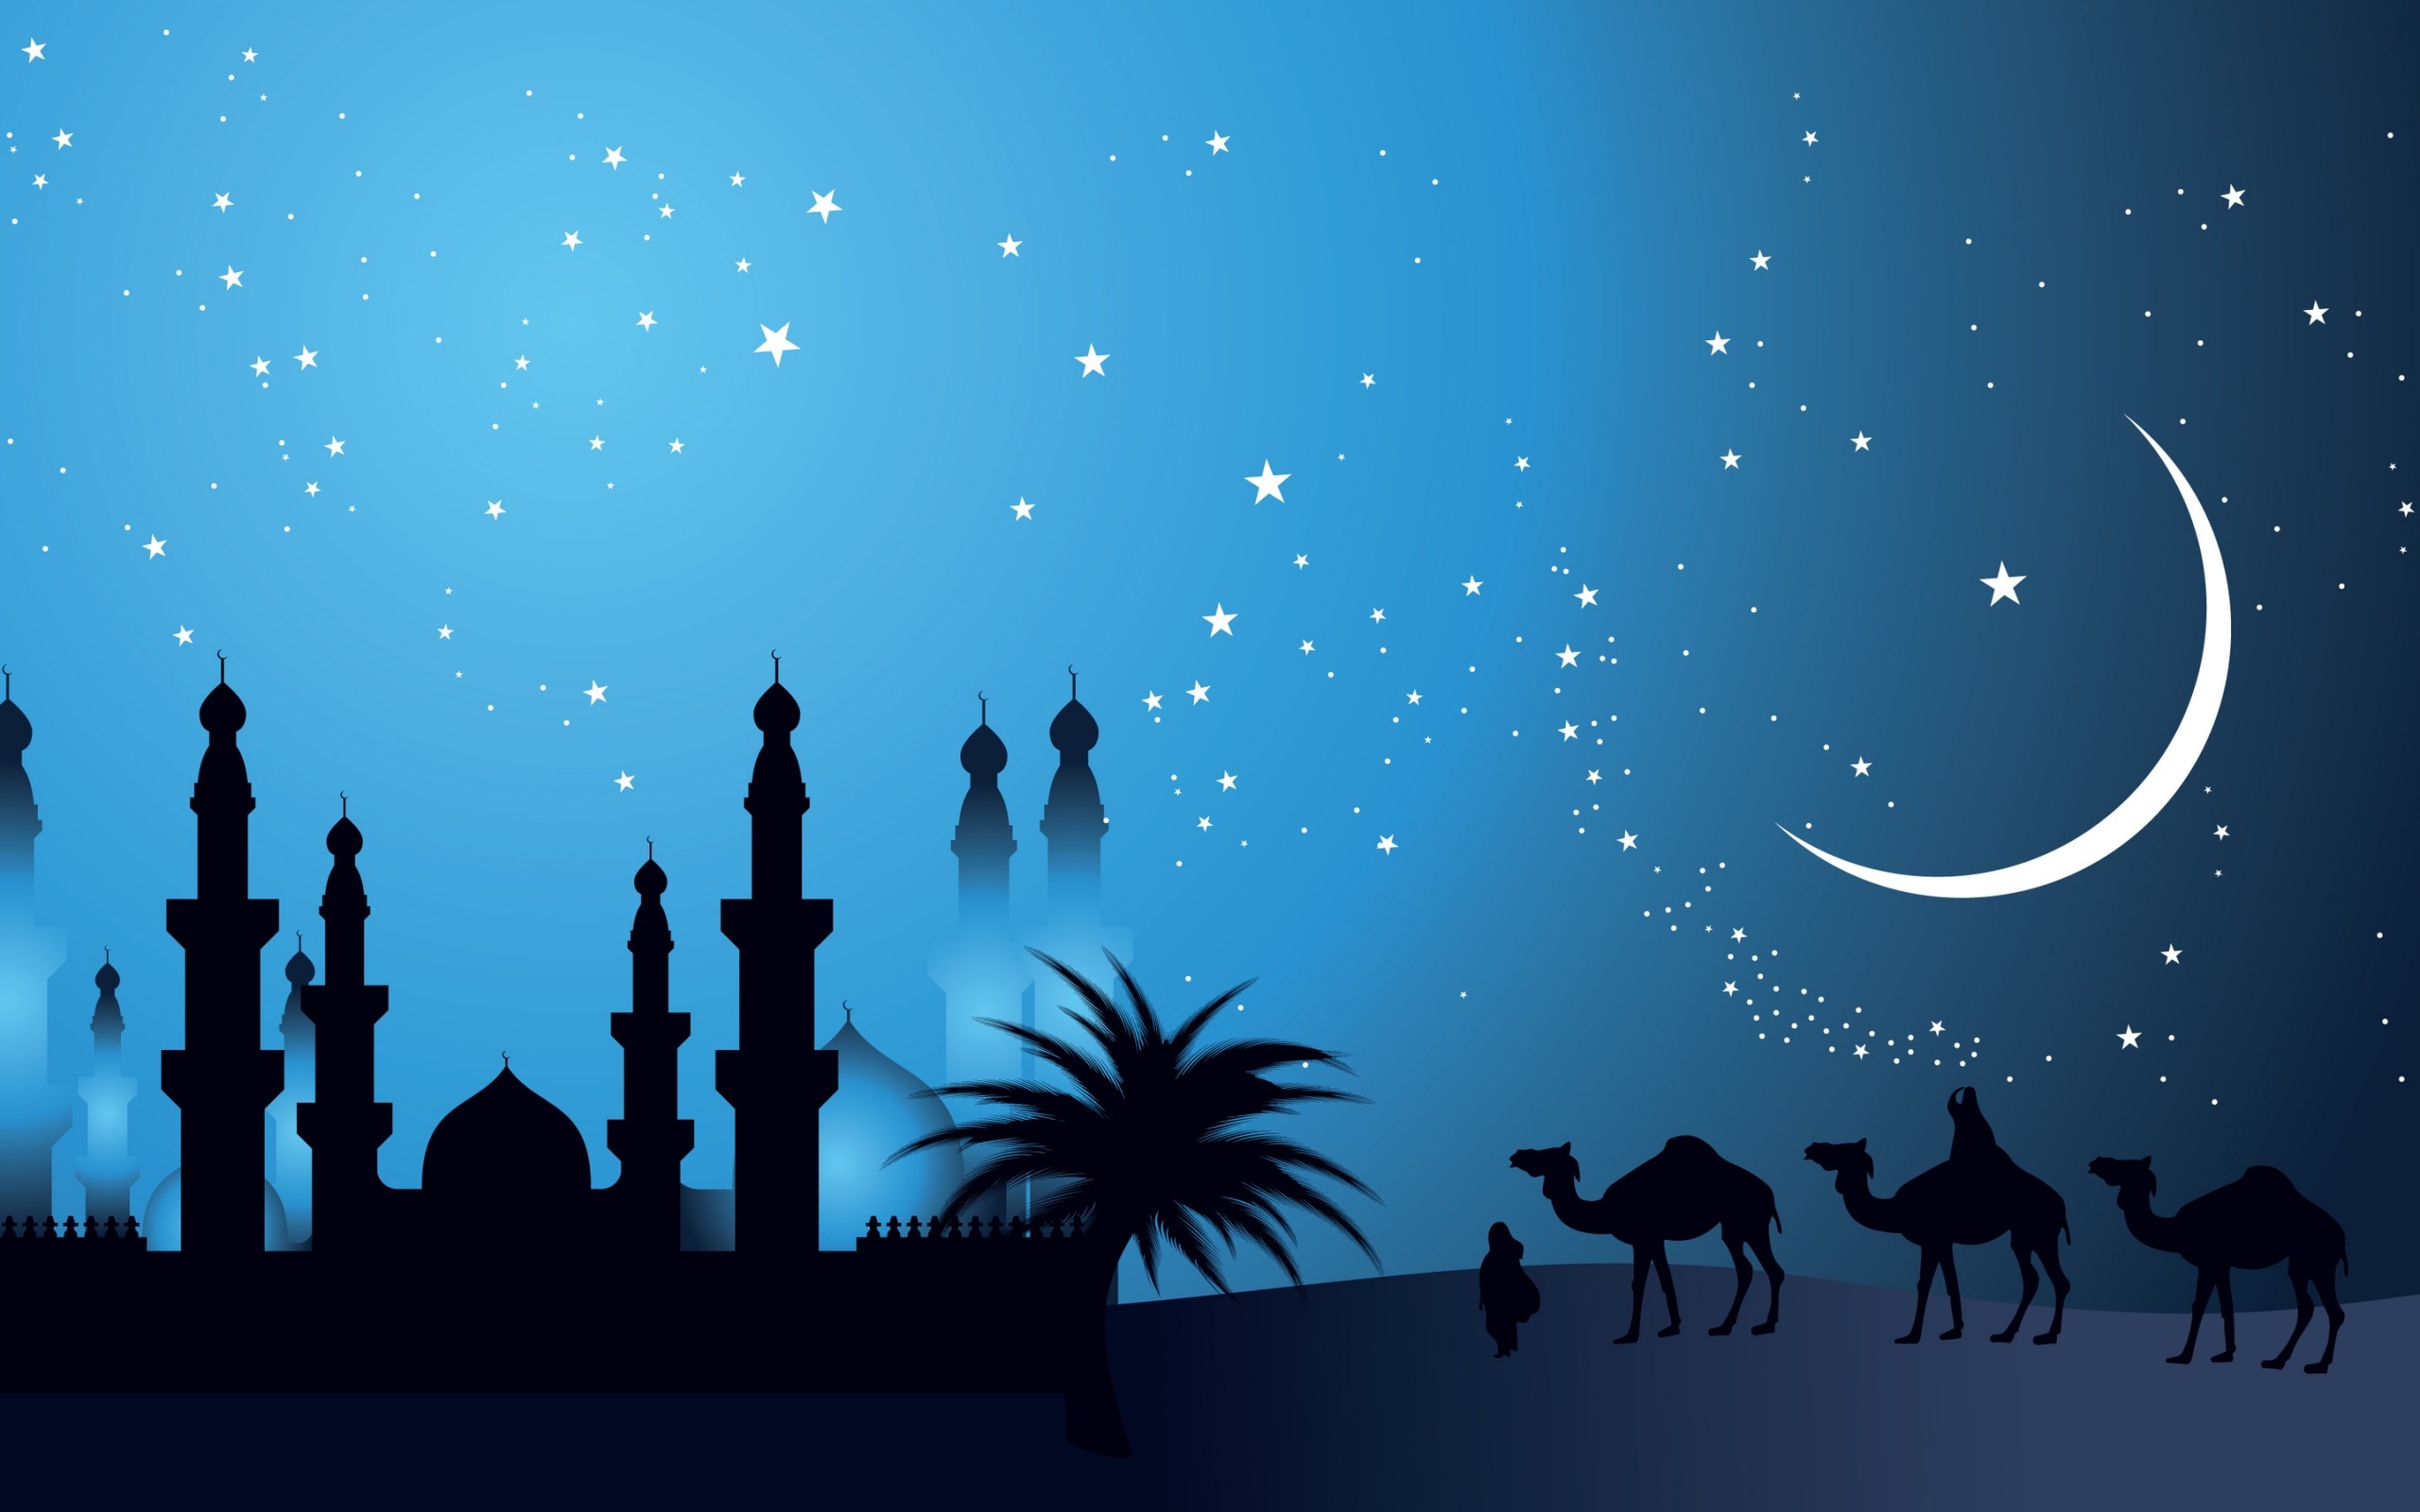 Islamic Wallpaper Download Free Cool Backgrounds For Desktop